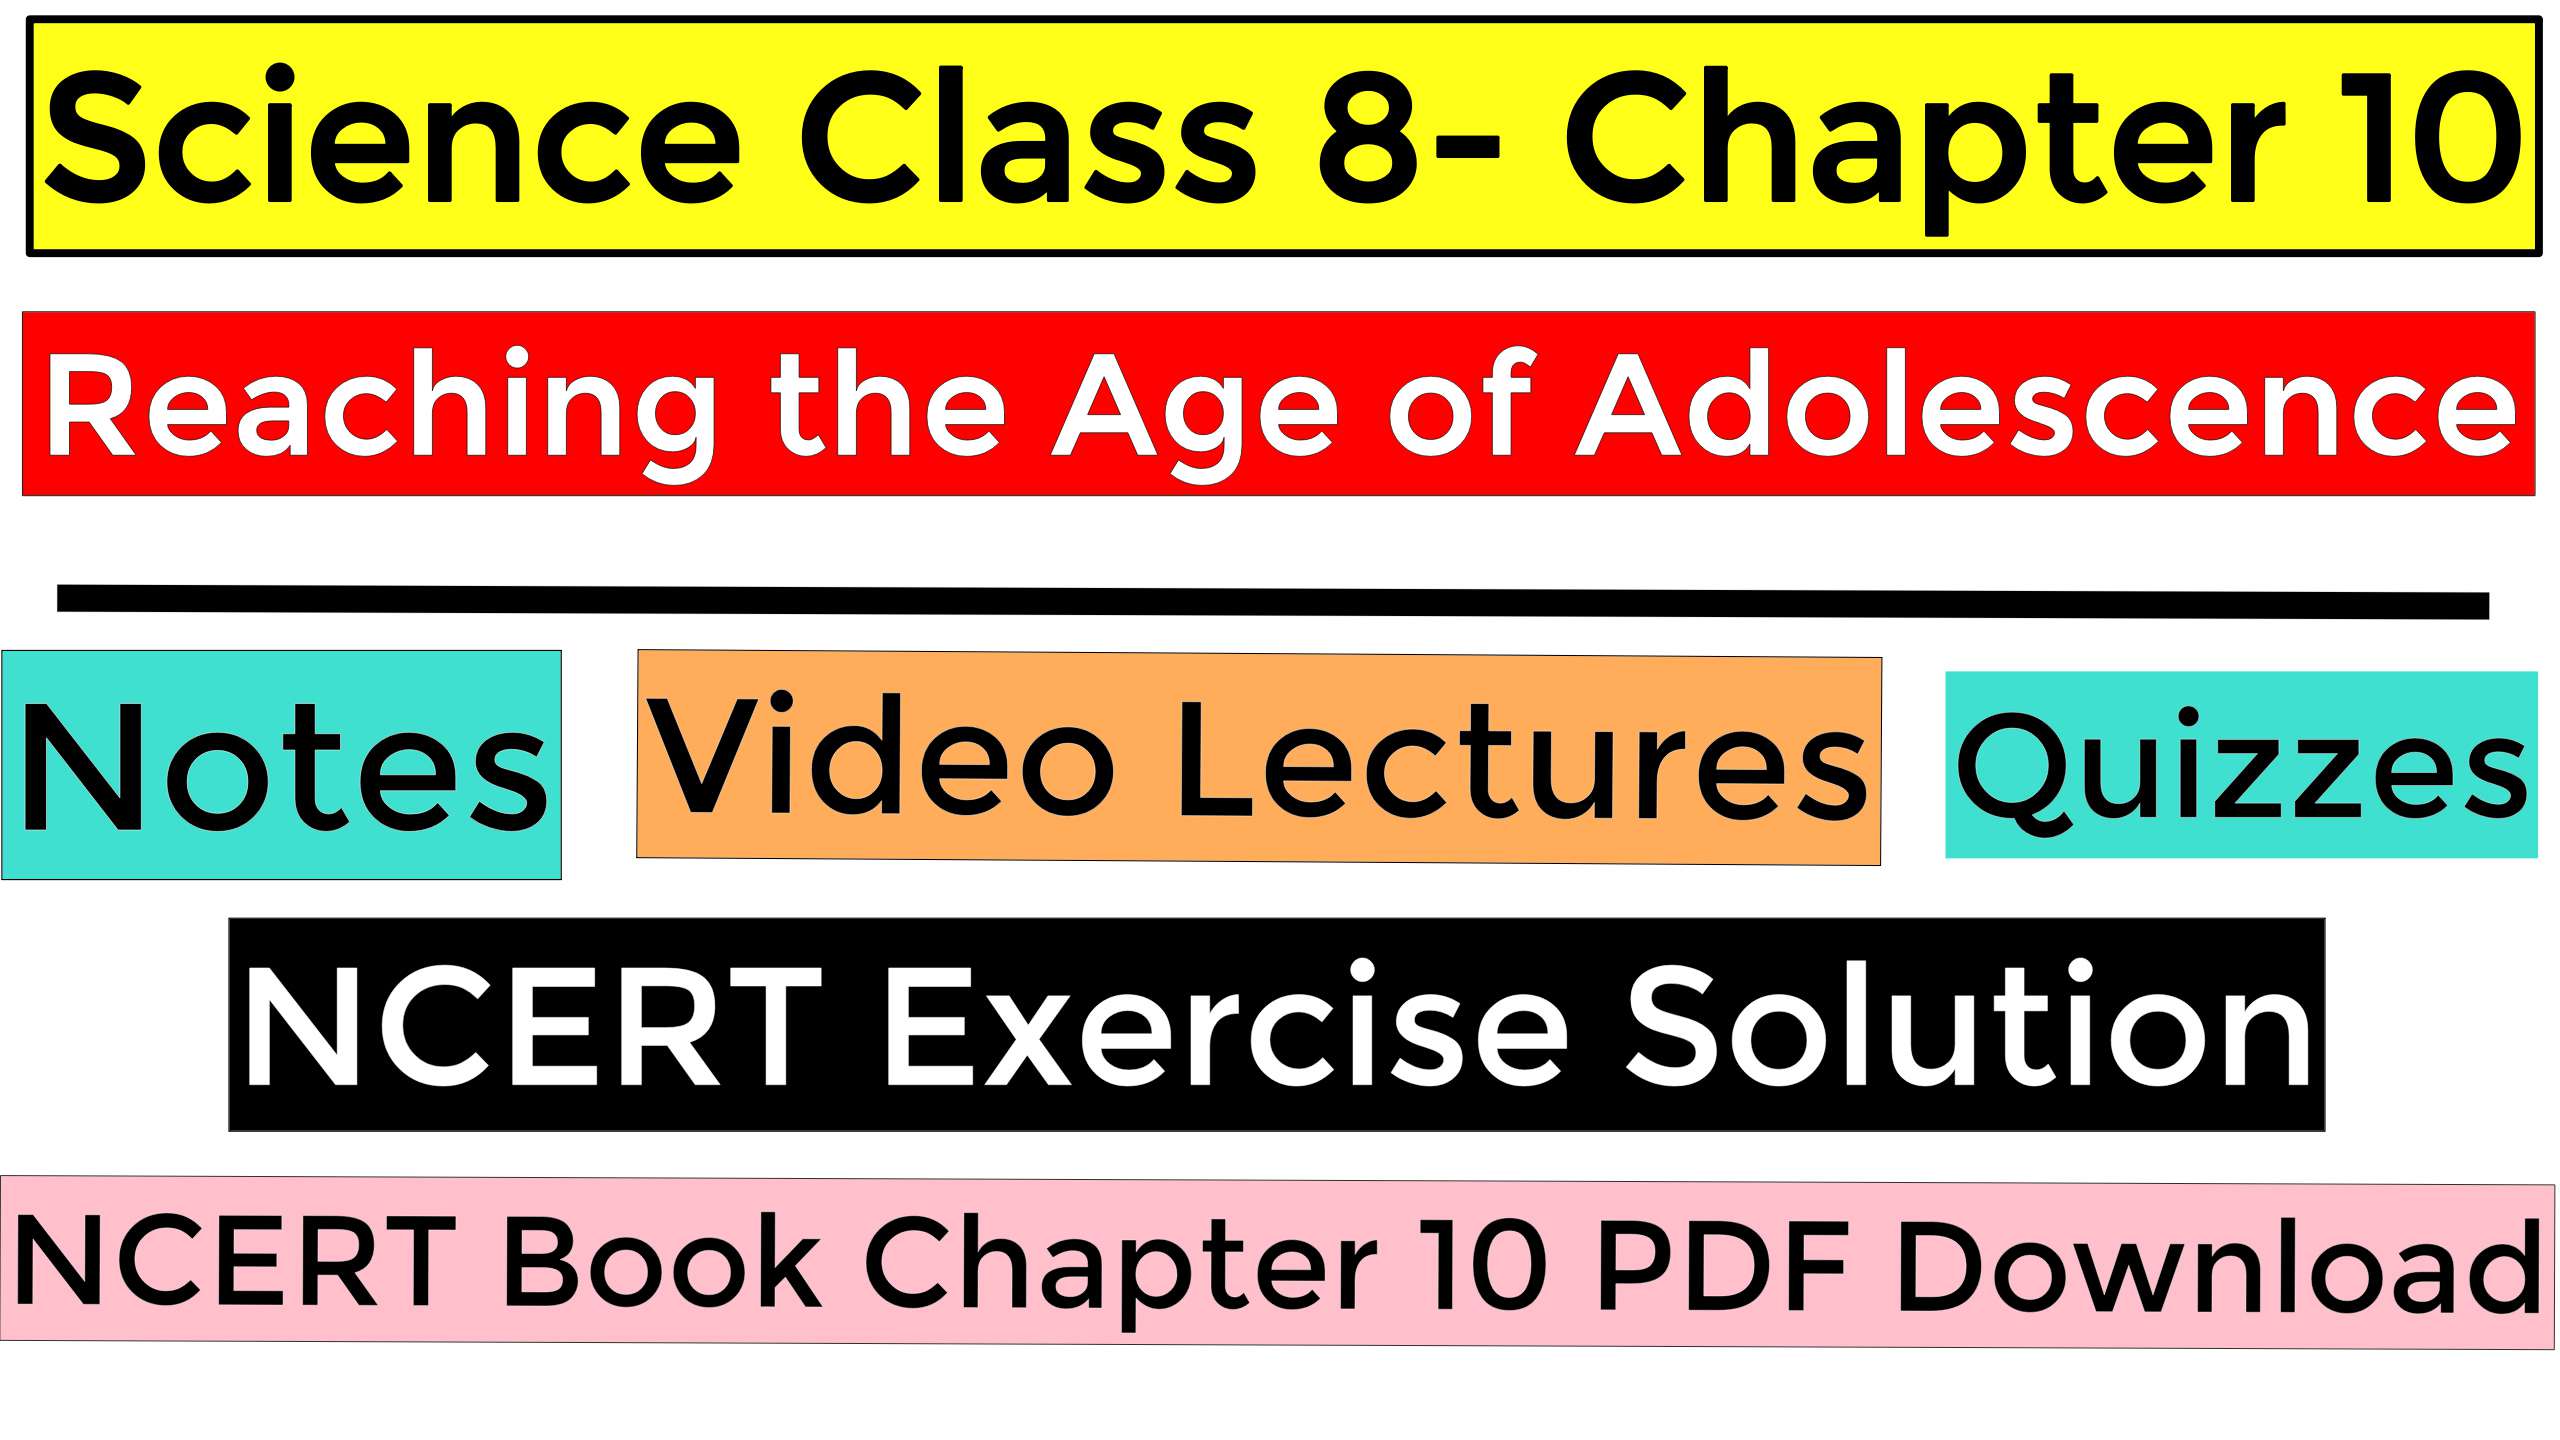 Science Class 8- Chapter 10- Reaching the Age of Adolescence - Notes, Video Lectures, NCERT Exercise Solution, Quizzes, NCERT Book Chapter 10 PDF Download.